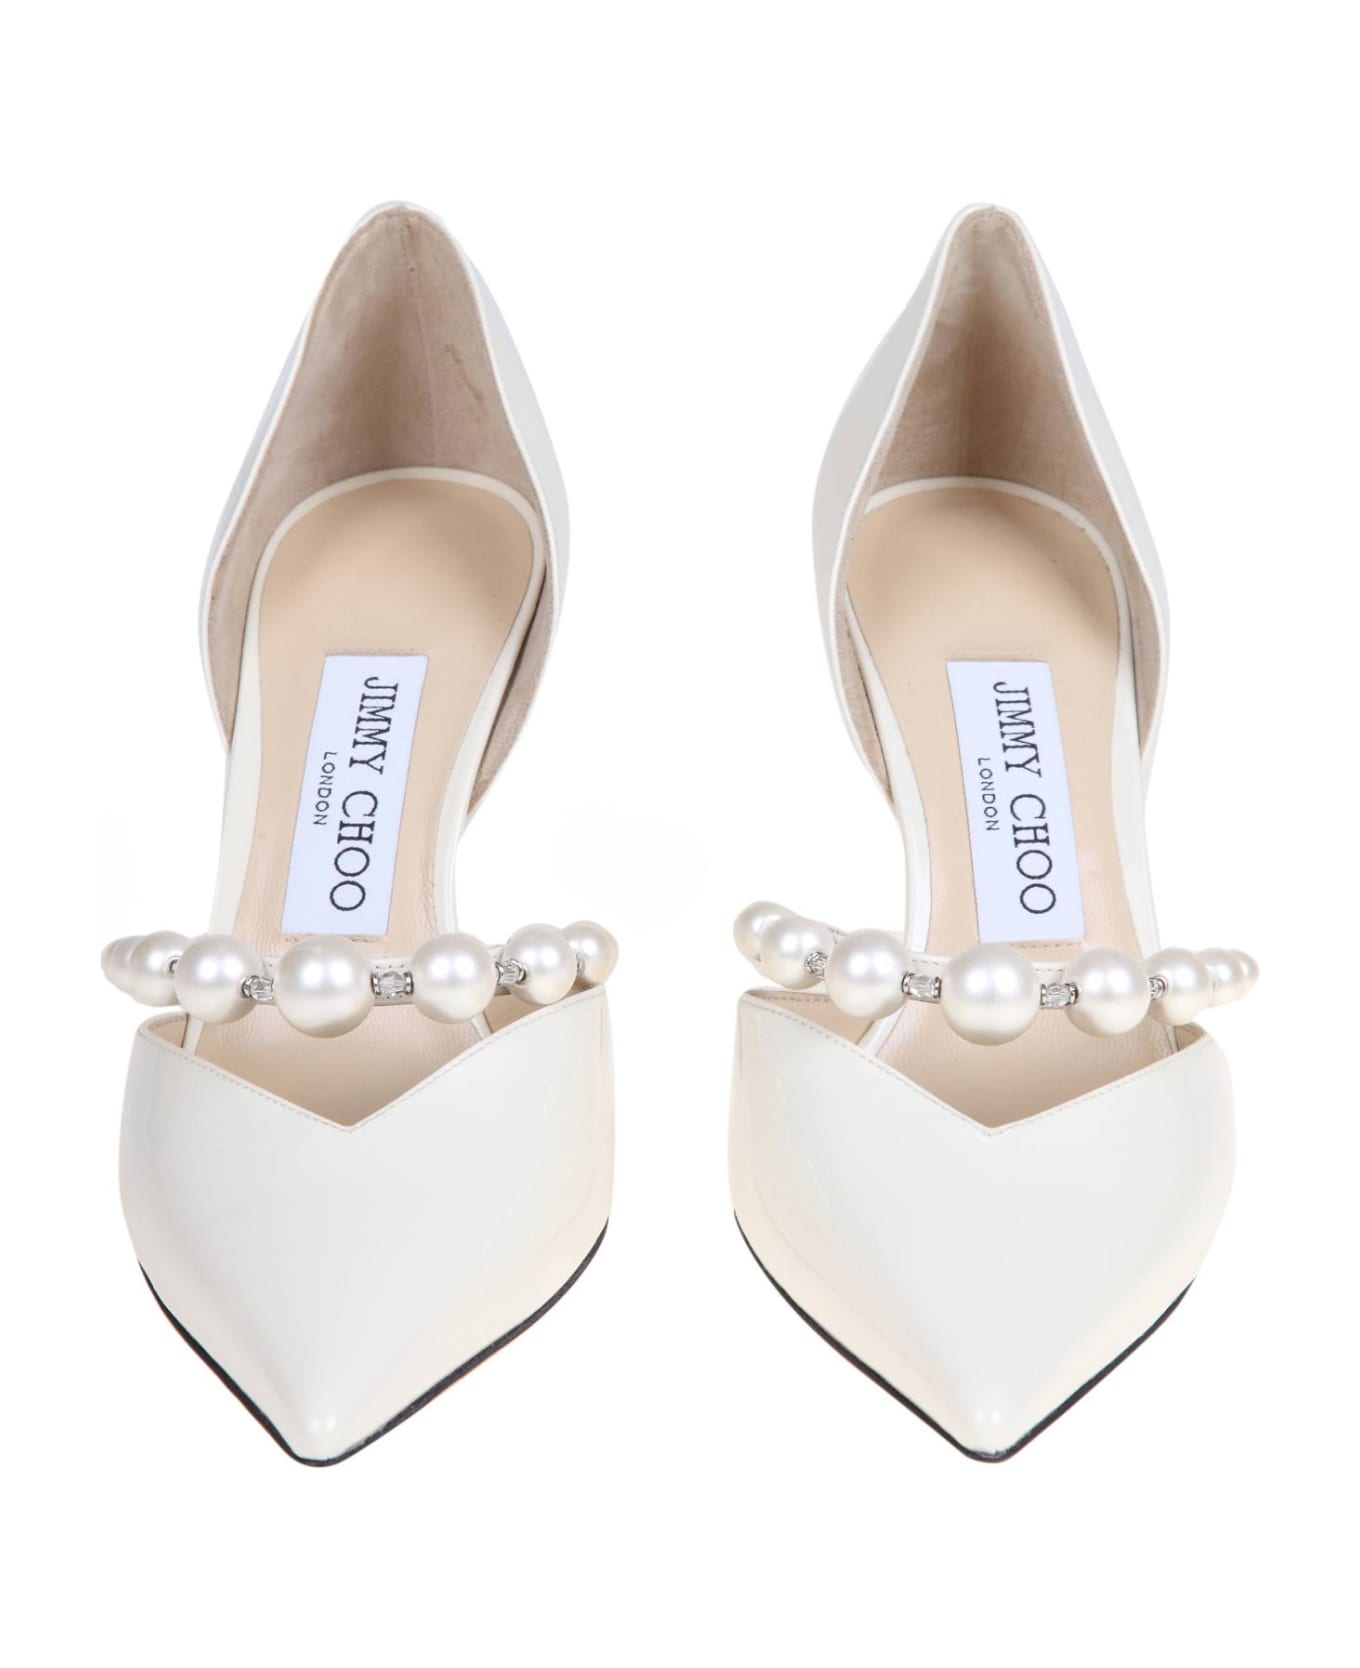 Jimmy Choo Aurelie 85 Patent Leather Pumps With Applied Pearls